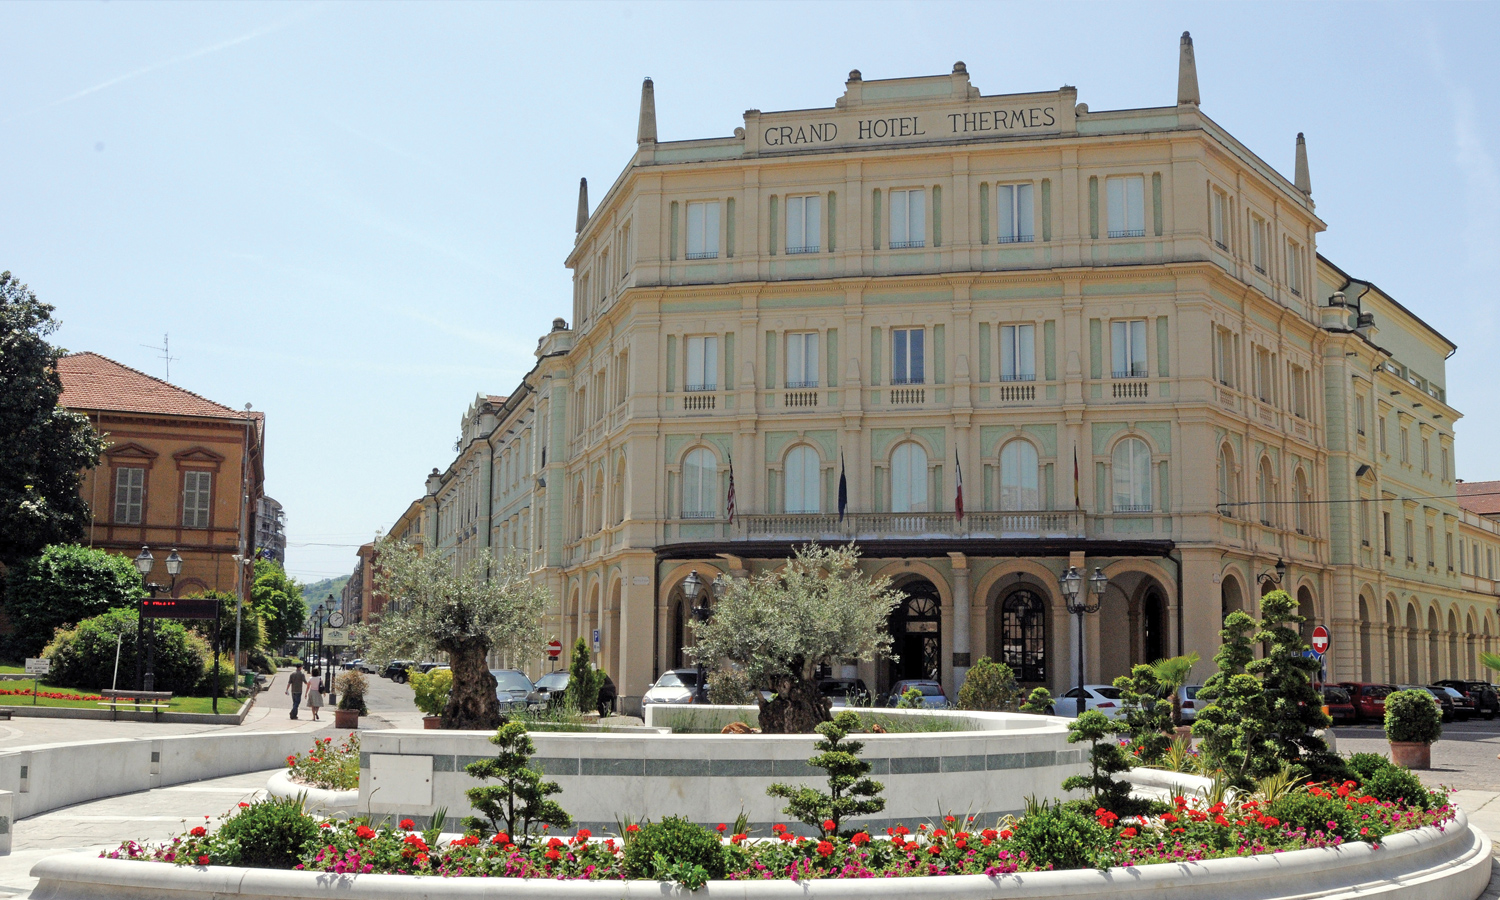 Piazza Italia, Acqui's main square, and the Hotel Nuove Terme, built along the spa building in 1870.